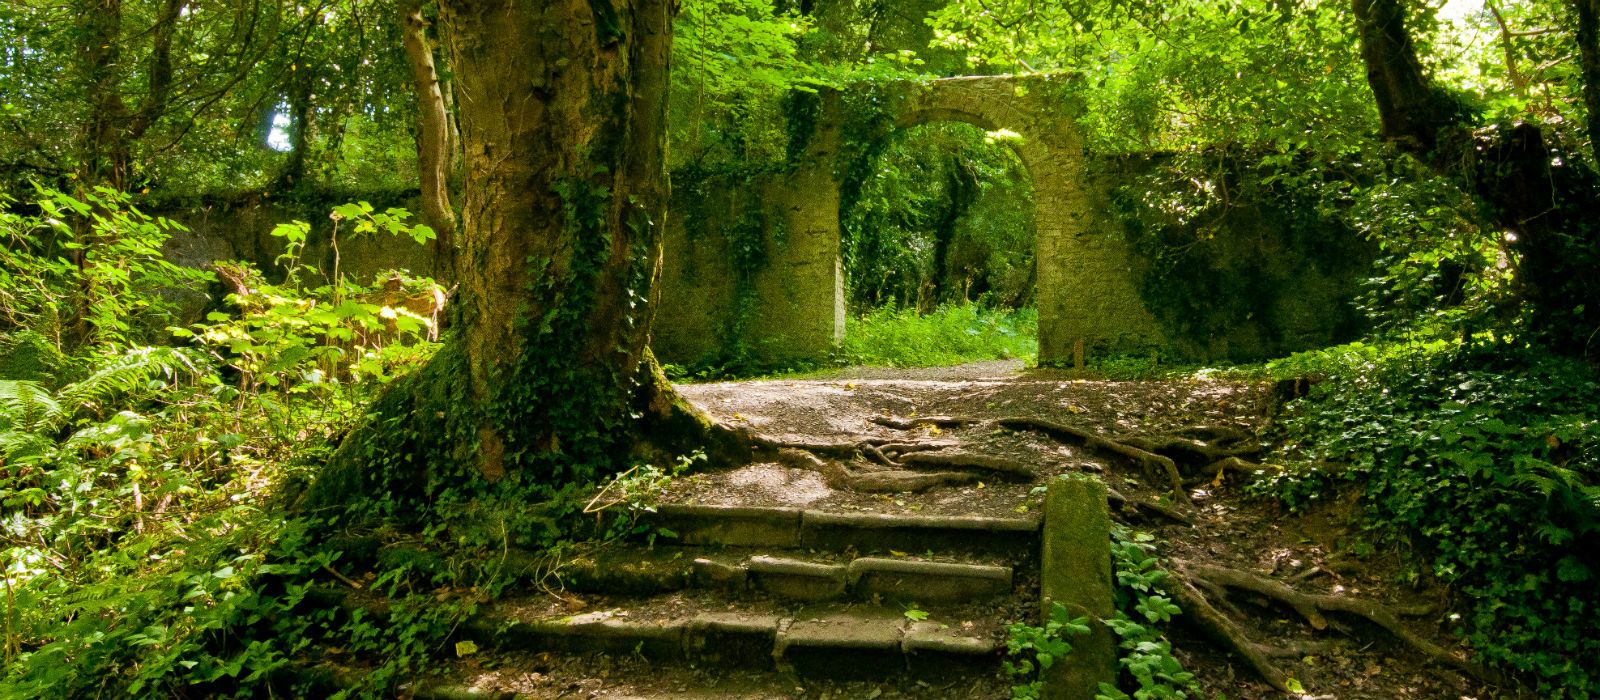 Castle gate & Gardens, accommodation by Discover Ireland Tours Destination Management Company